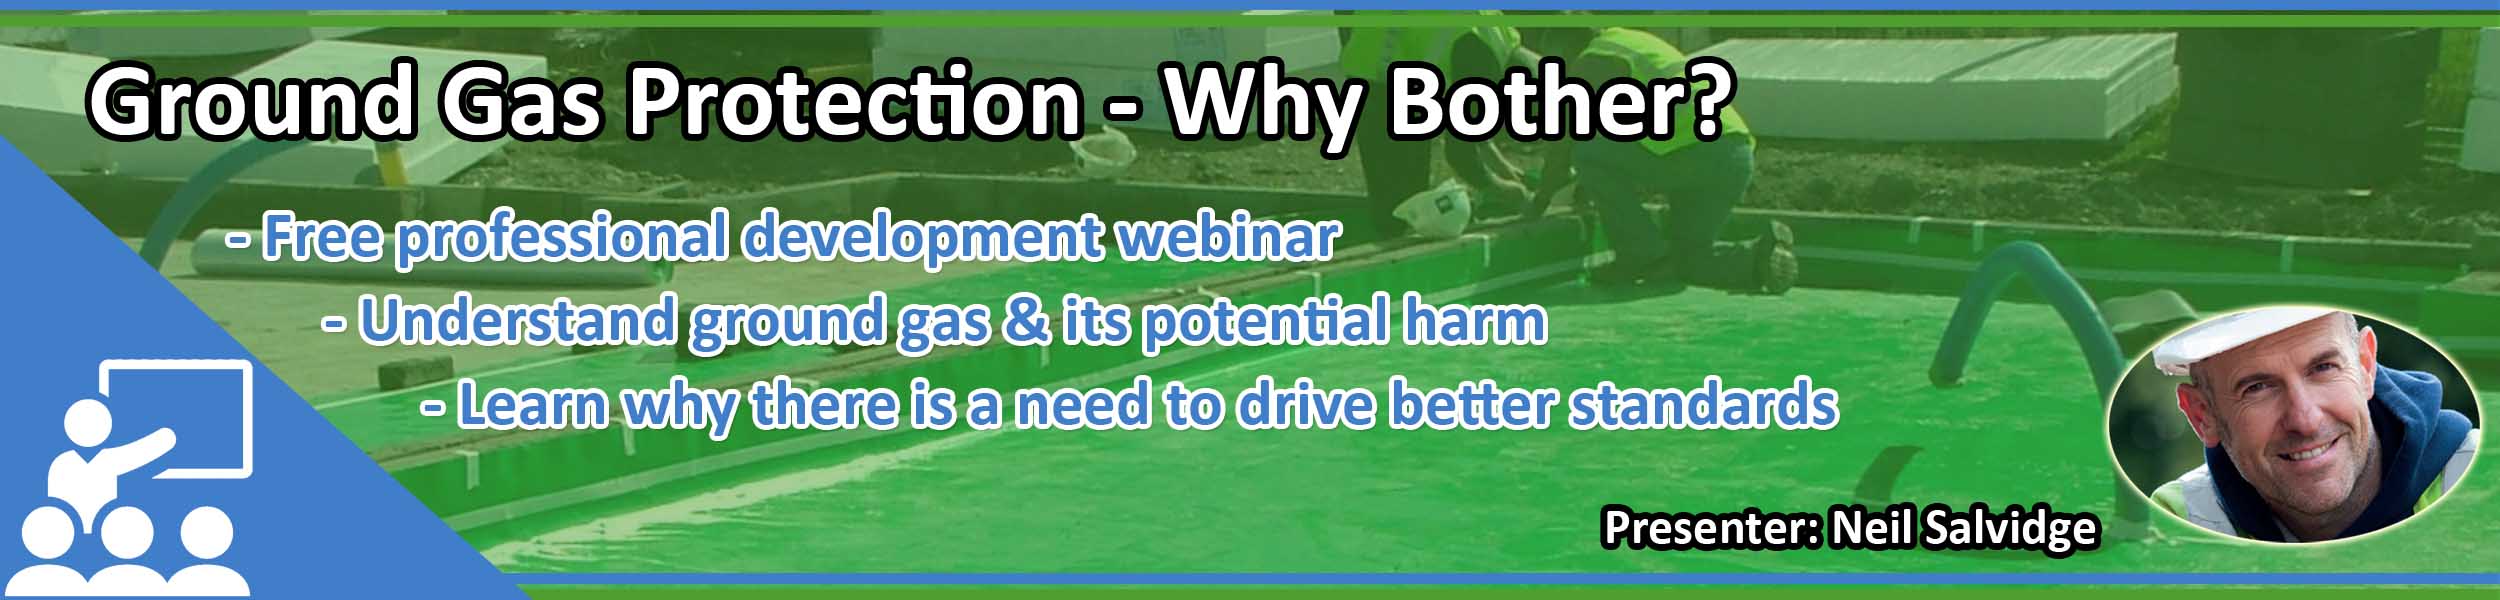 Webinar-Ground-Gas-Protection-Why-Bother-post-webinar